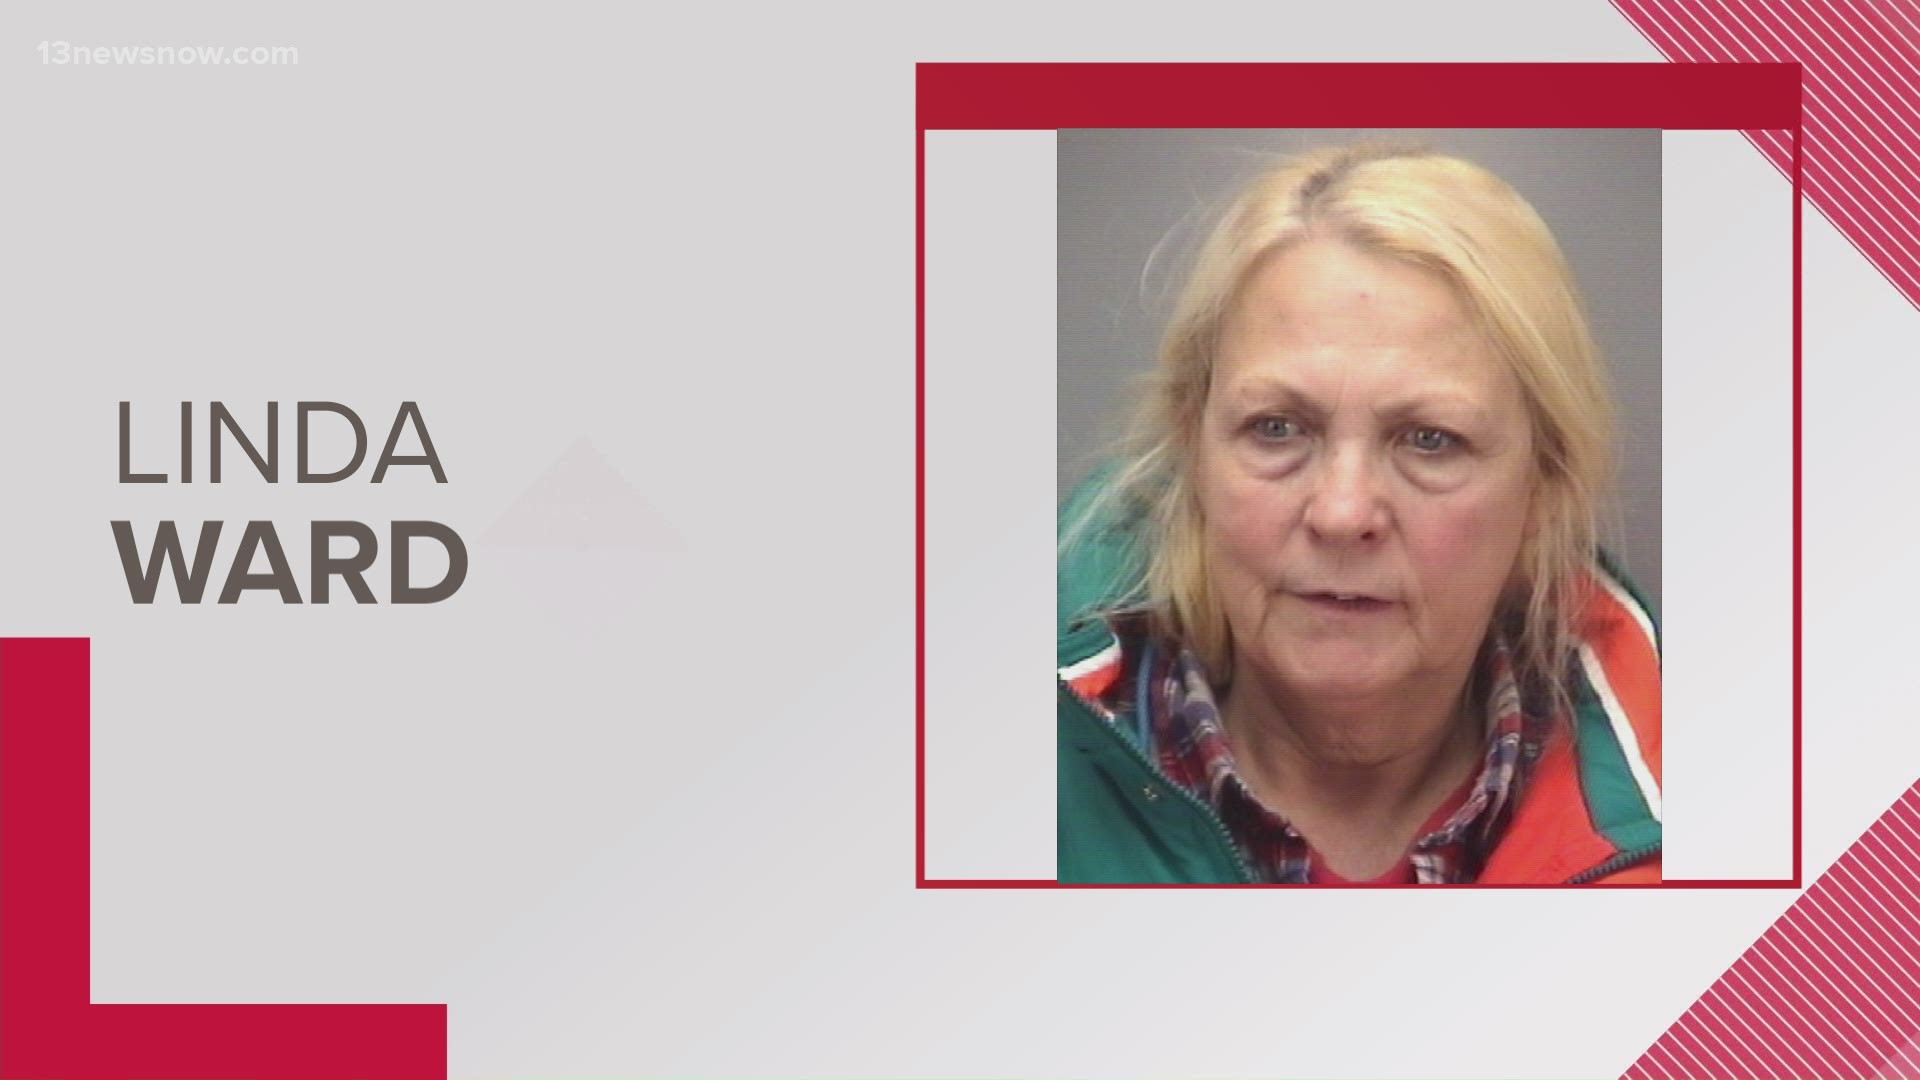 Officers said Linda Ward, 73, last was seen talking to a man on a street corner in Downtown Suffolk.